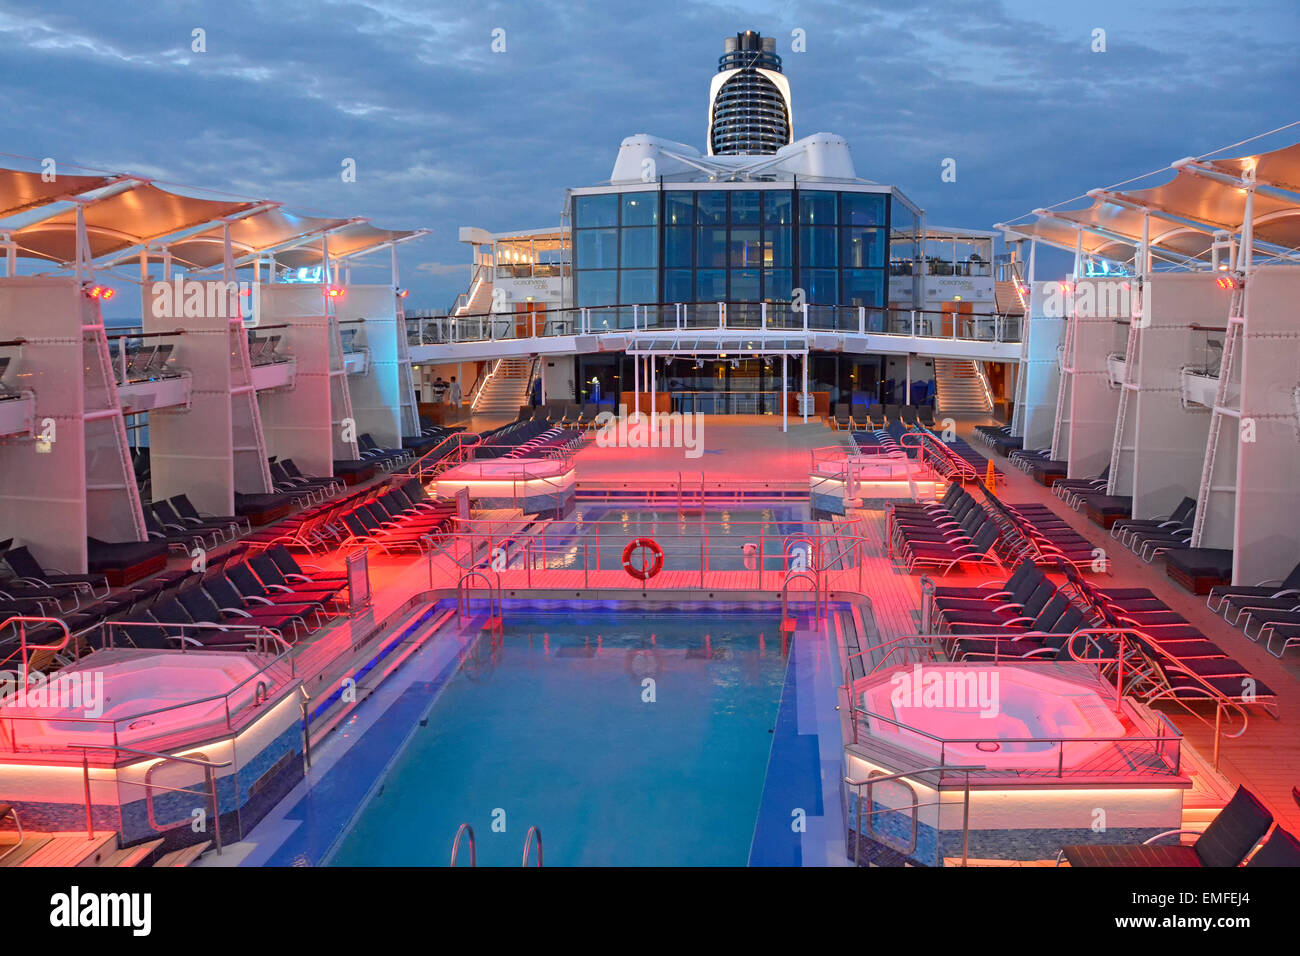 Flood lighting on cruise ship pool deck at end of day with passengers below decks for evening meal (for daytime view see Alamy Additional info panel) Stock Photo